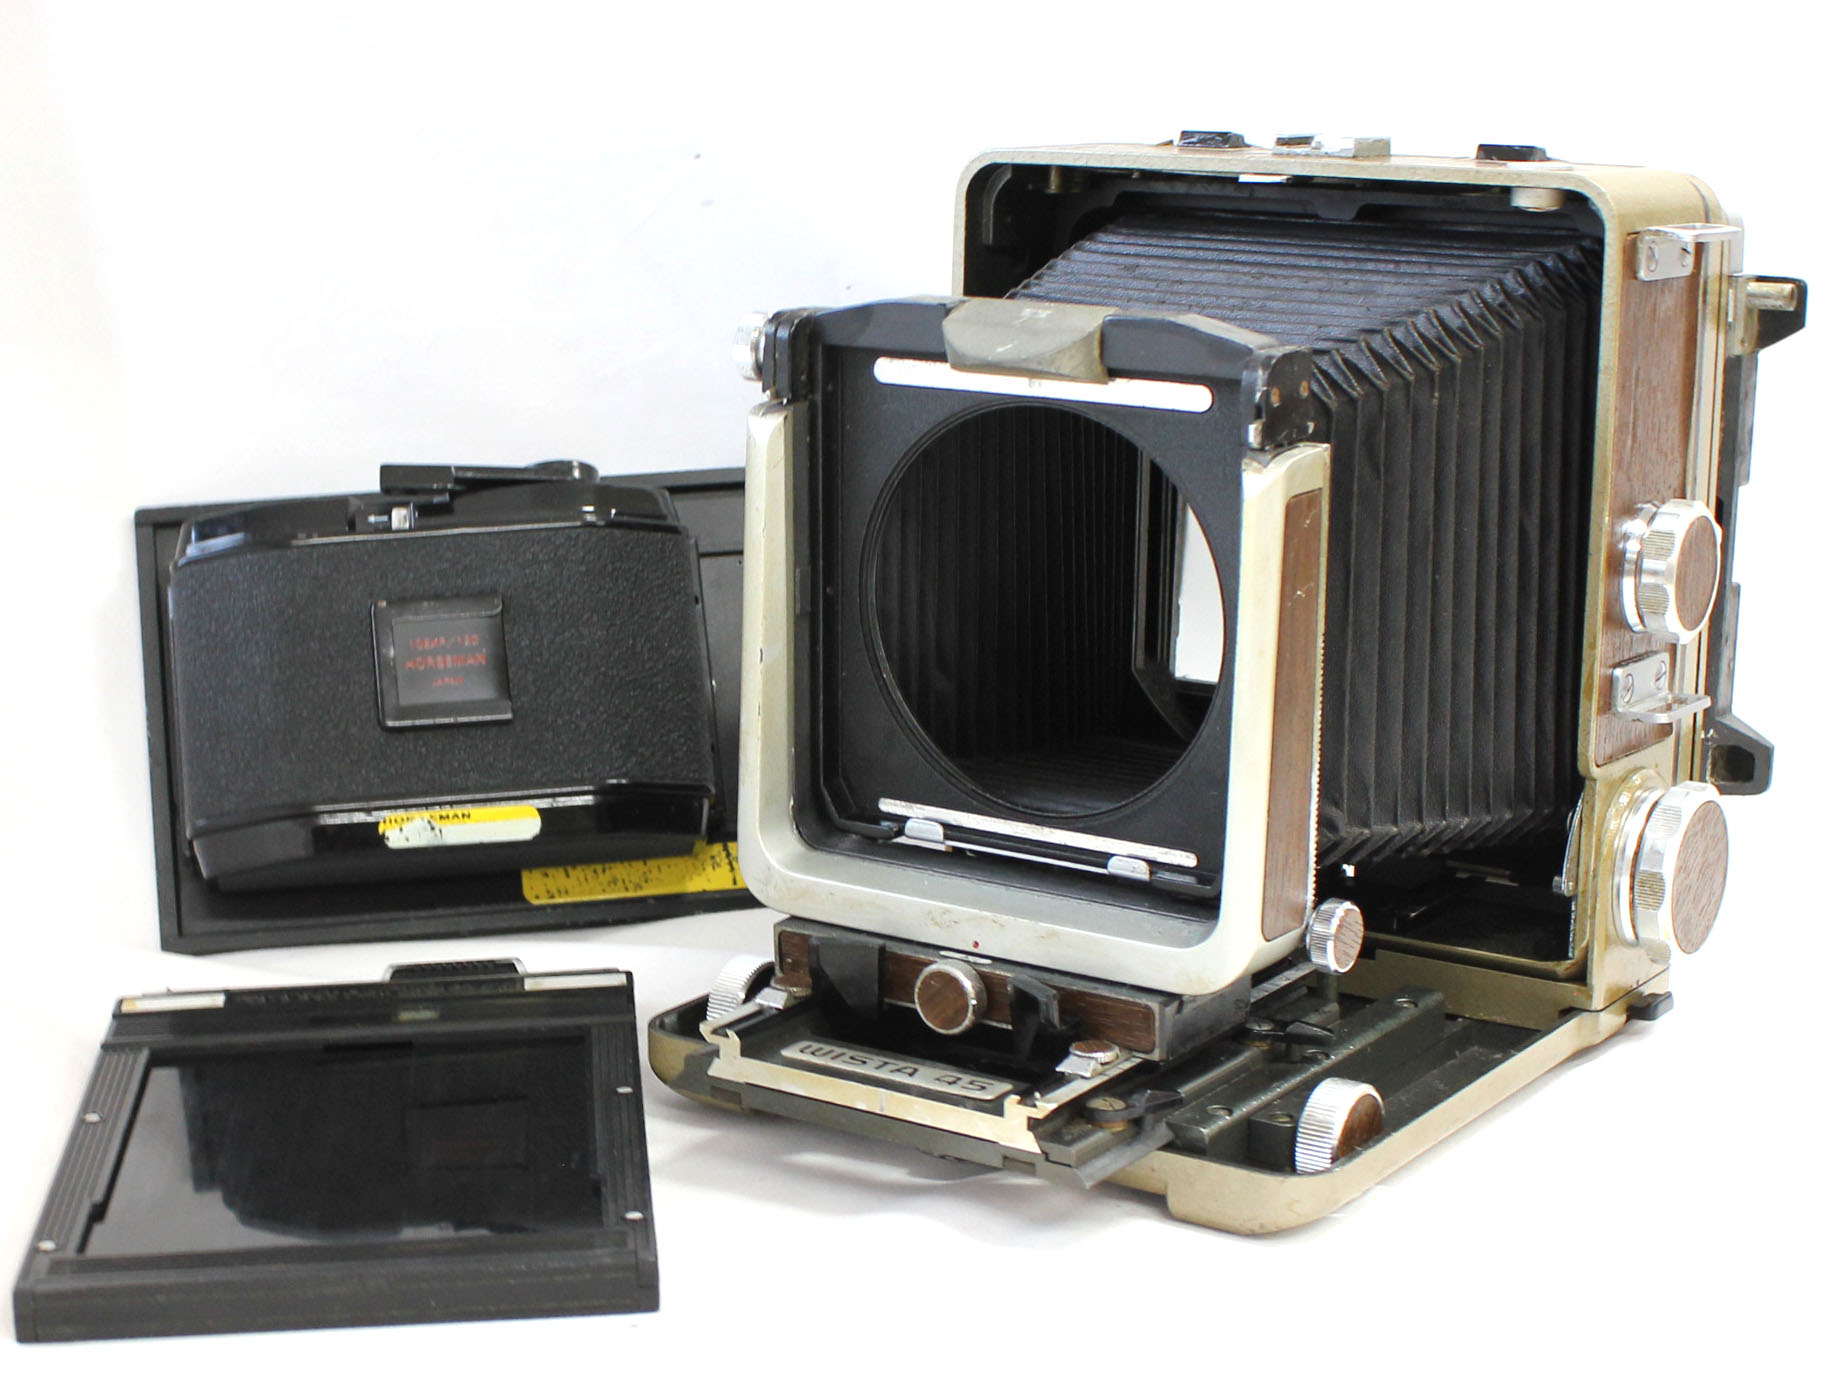 Japan Used Camera Shop | Wista 45 45D 4x5 Large Format Camera with Horseman 10EXP/120 6x7 Roll Film Back Holder & Toyo 4x5 Cut Film Holder from Japan